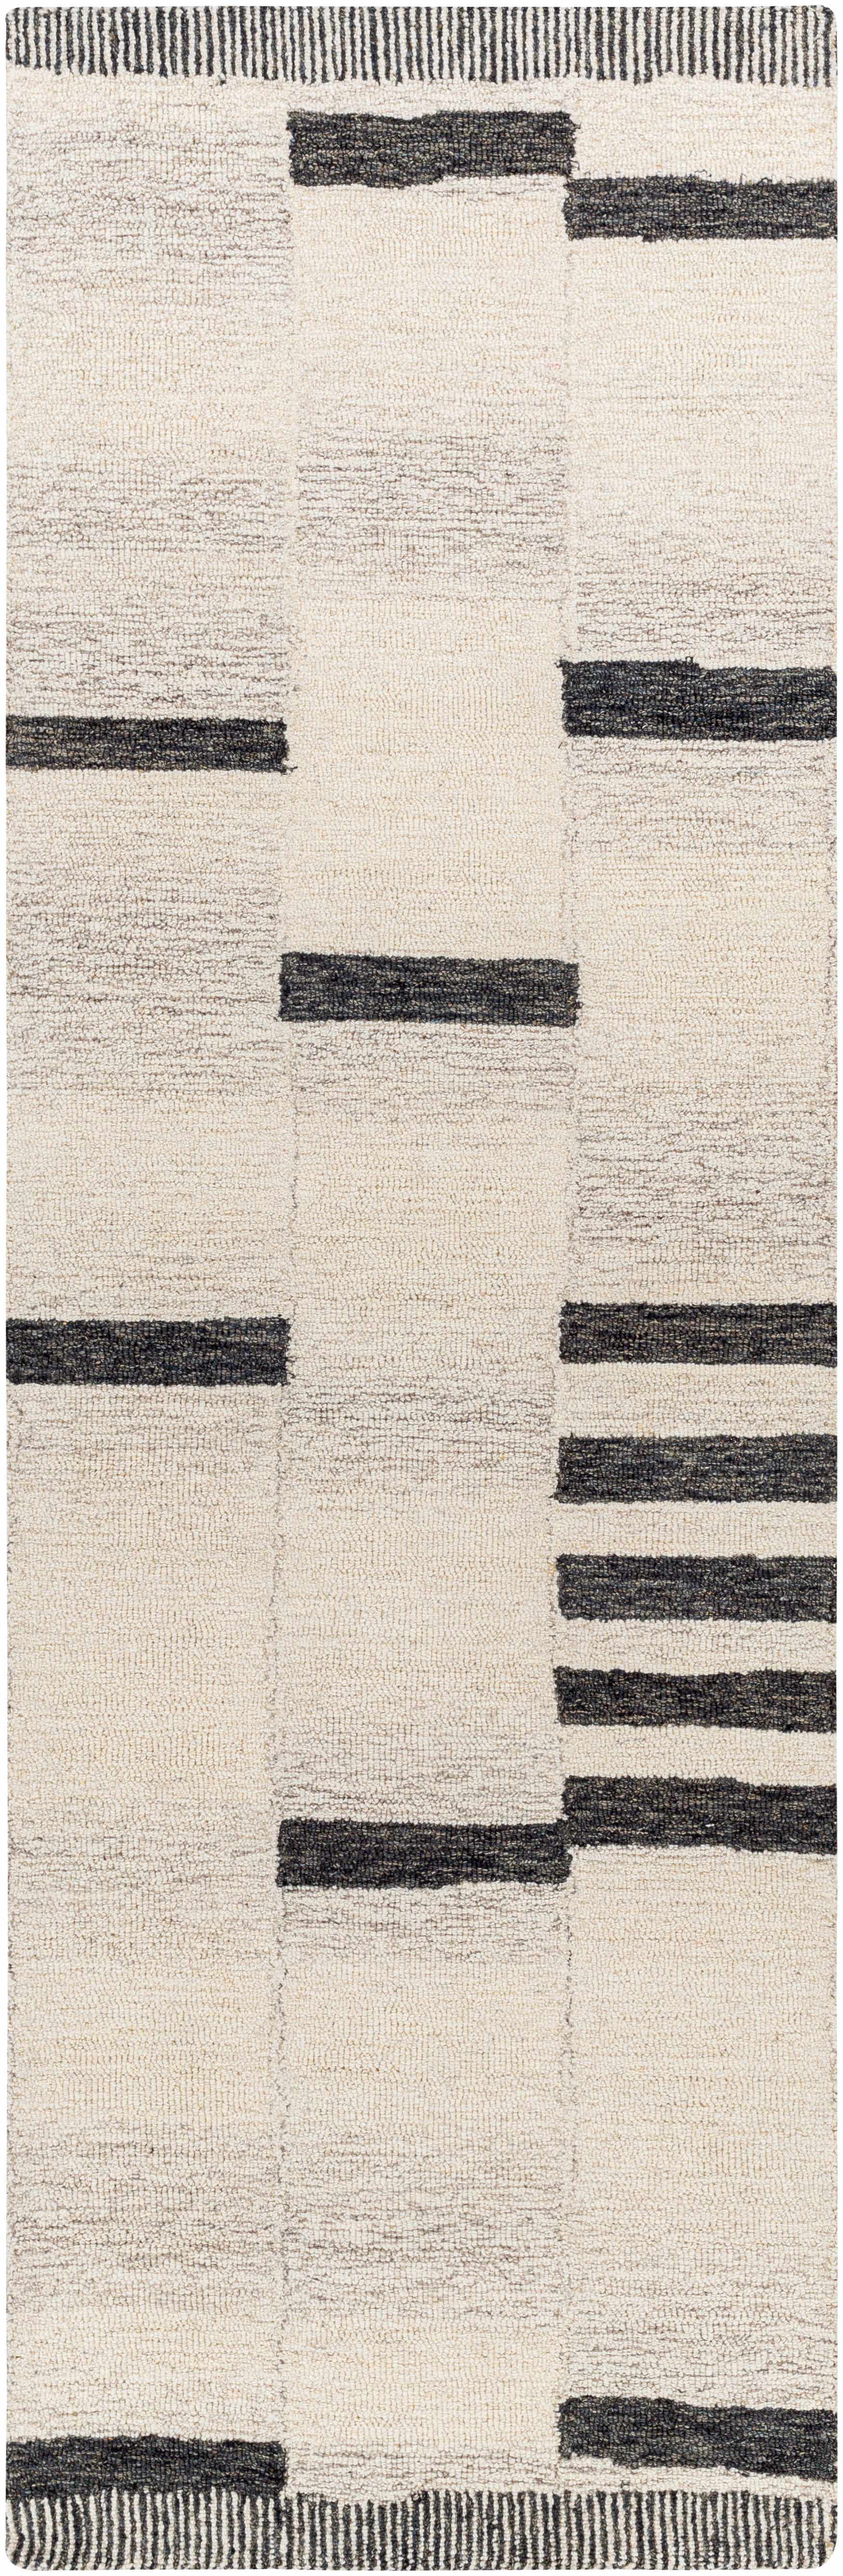 Boutique Rugs Rugs 2'6" x 8' Runner Aibonito Wool Area Rug